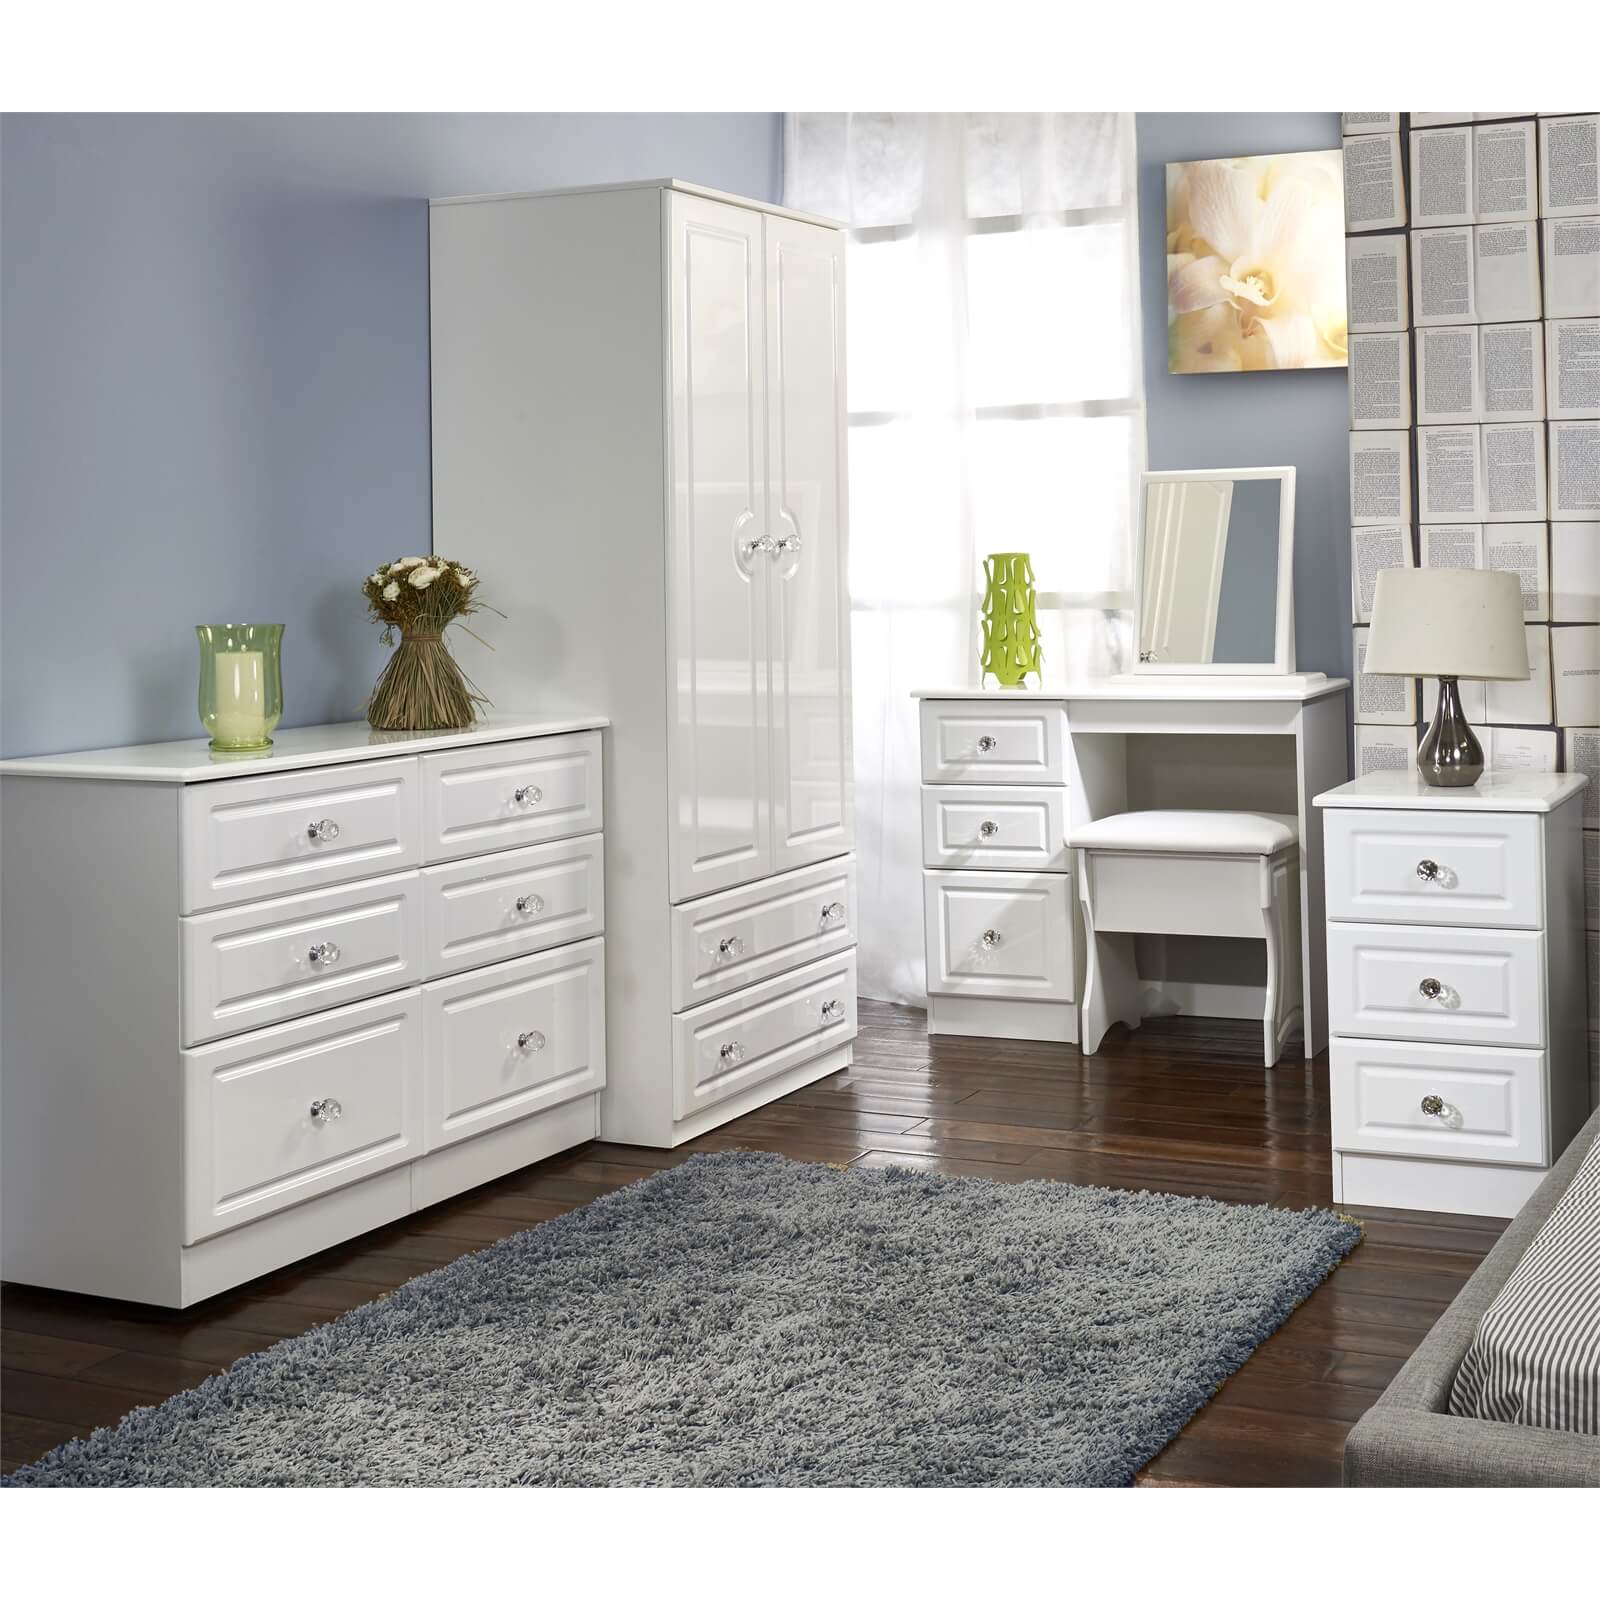 Stonehaven 3 Drawer Bedside with Wireless Charging - White